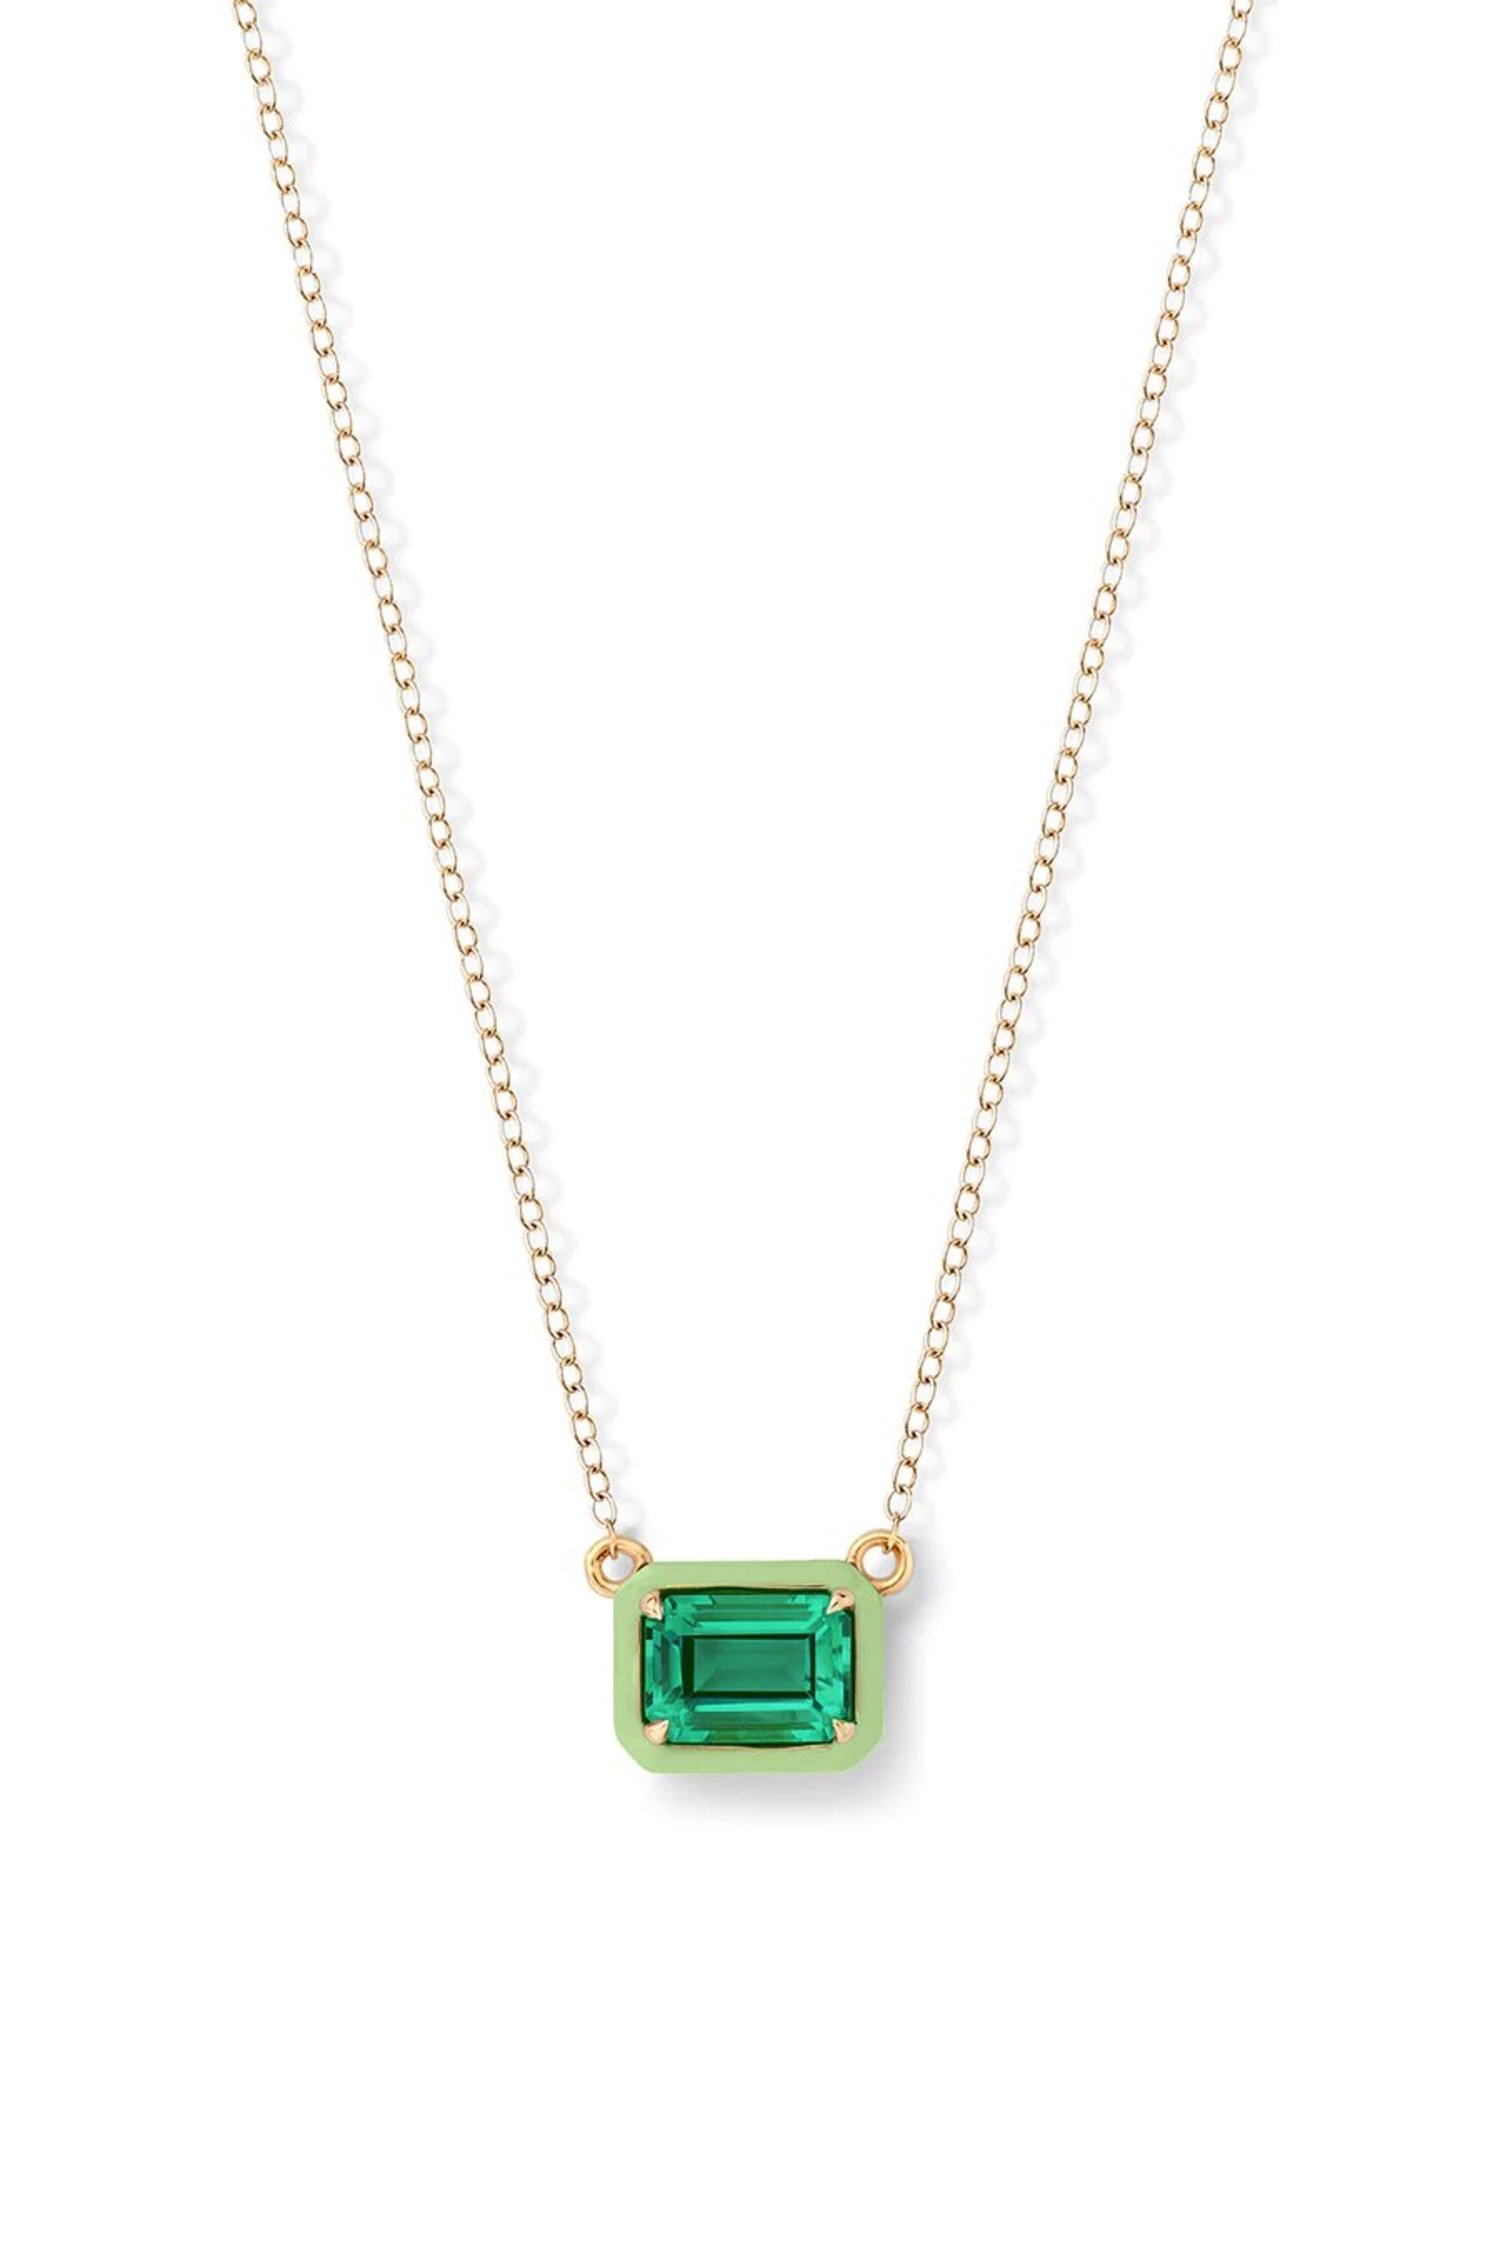 Emerald Rectangular Cocktail Necklace in 14K Yellow Gold